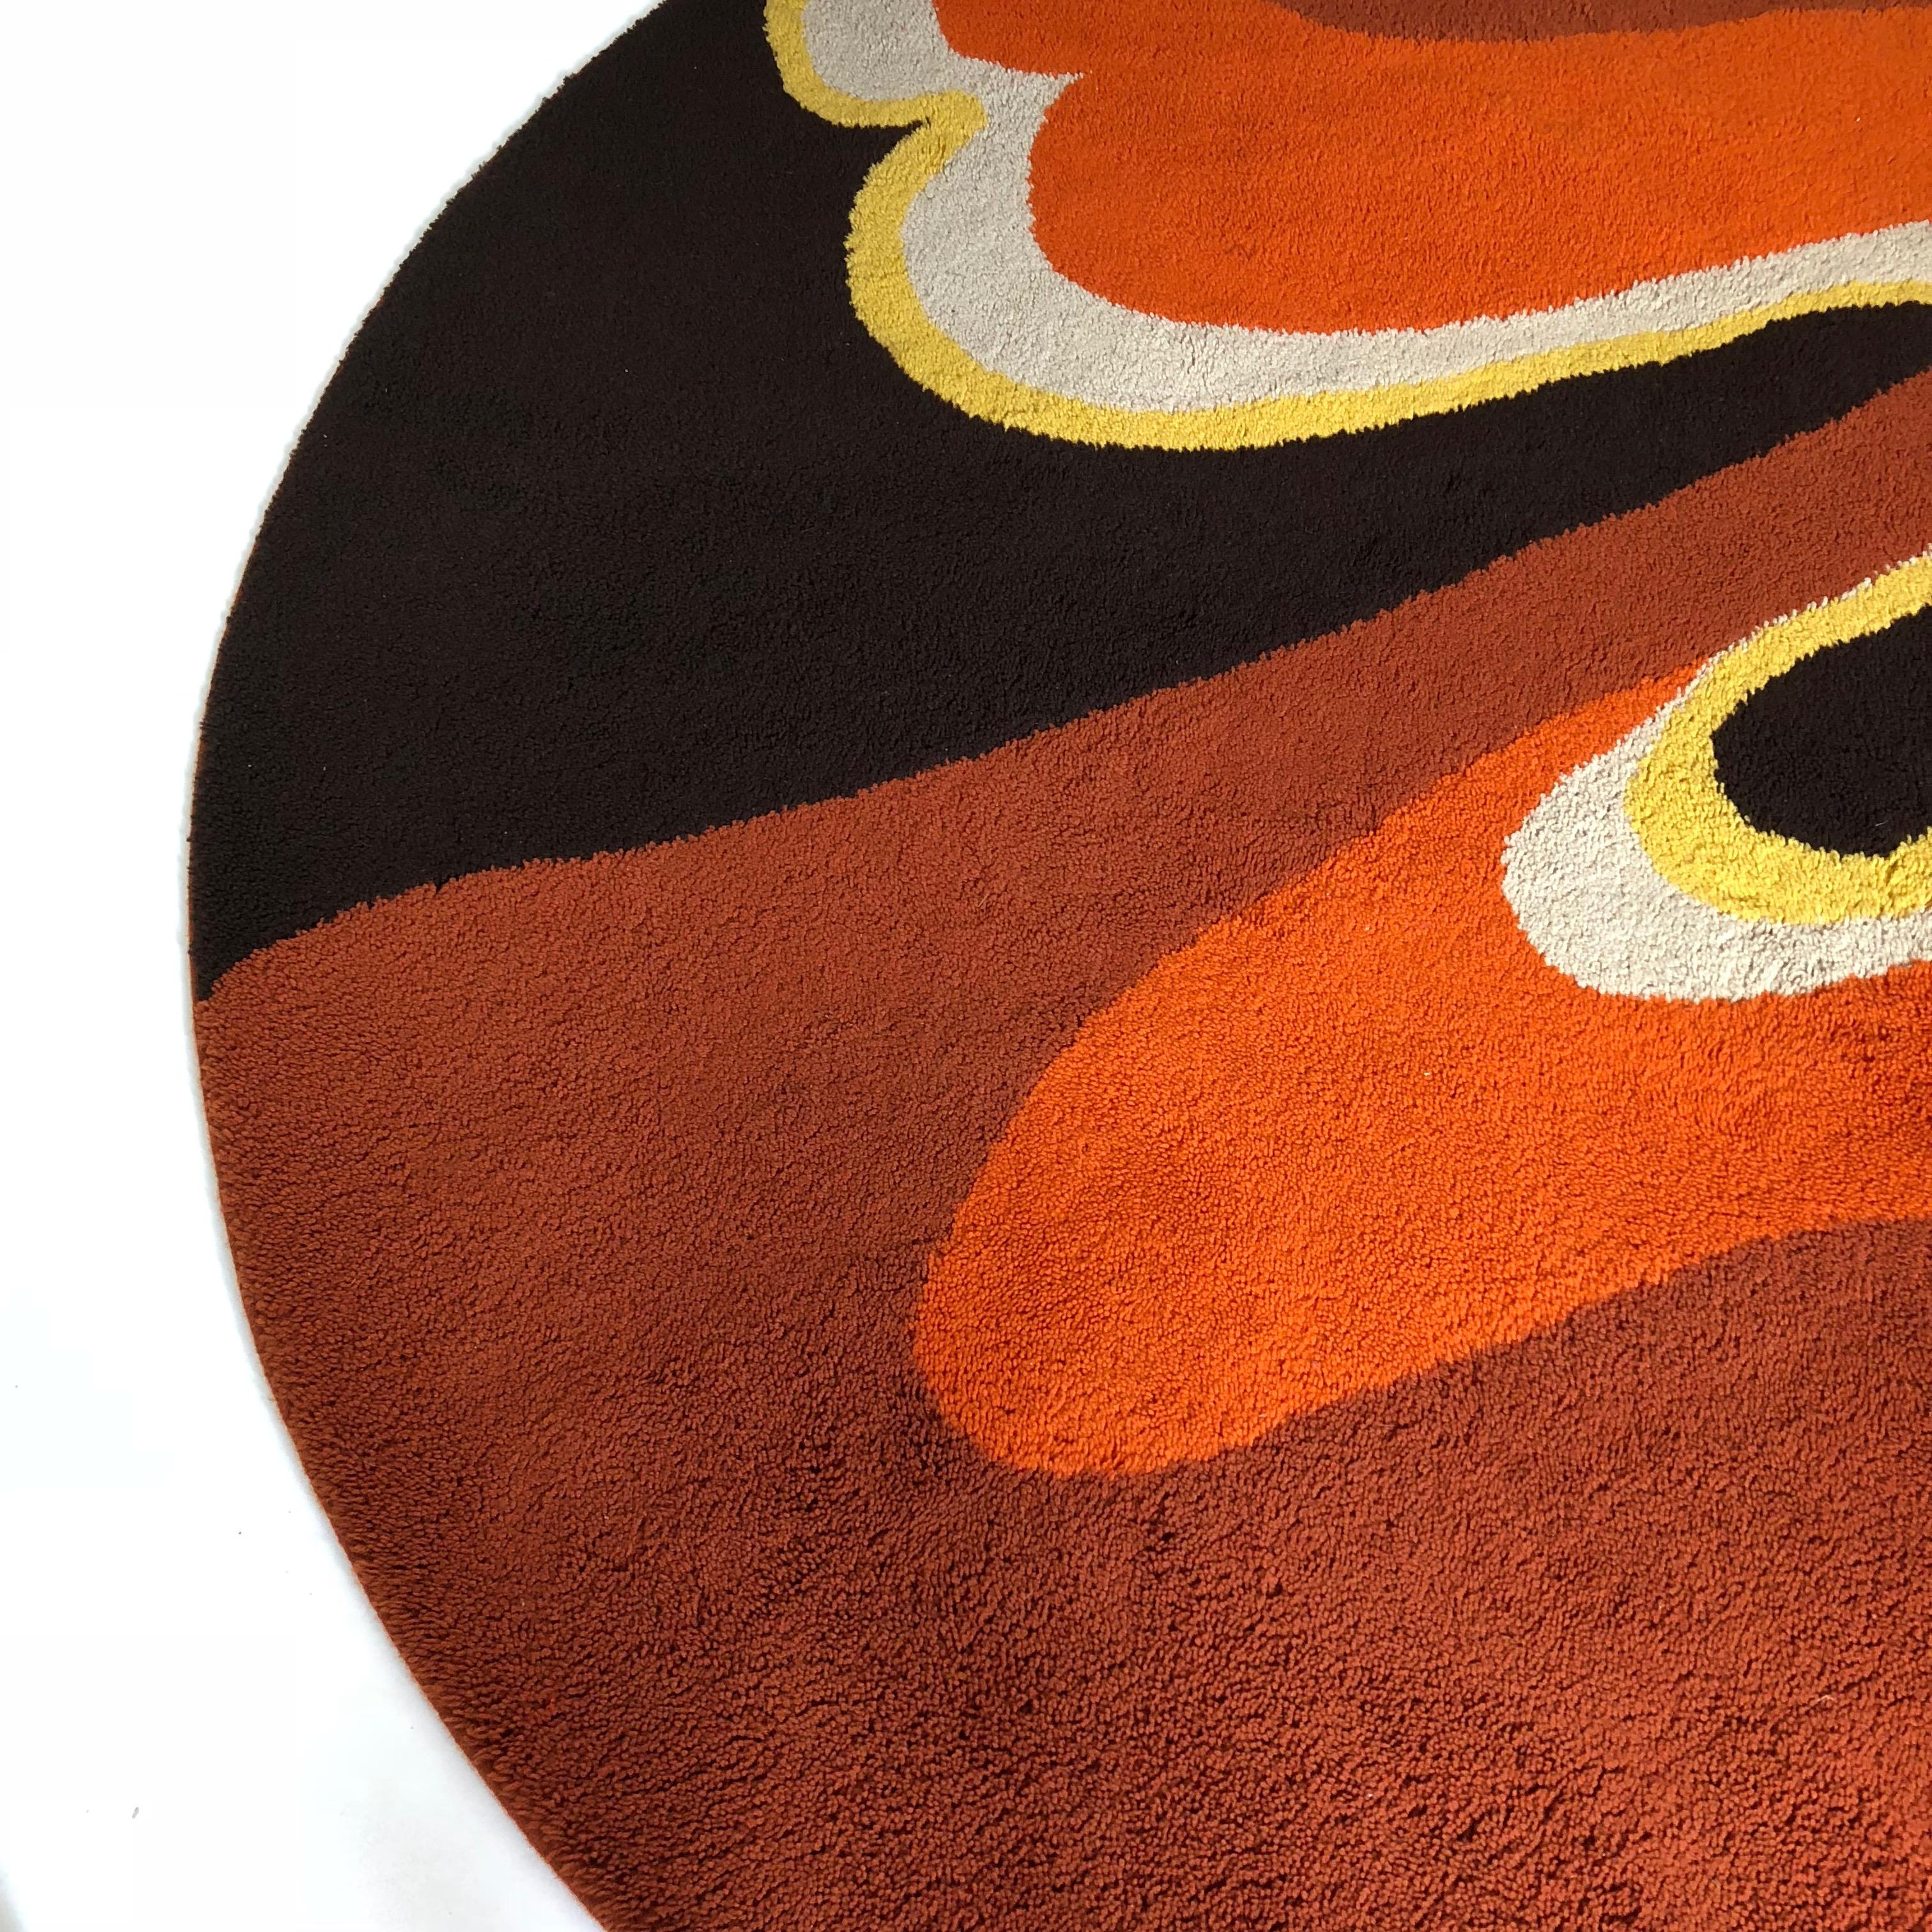 Large Psychedelic Panton High Pile Rug Carpet by Cromwell Tefzet, Germany 2